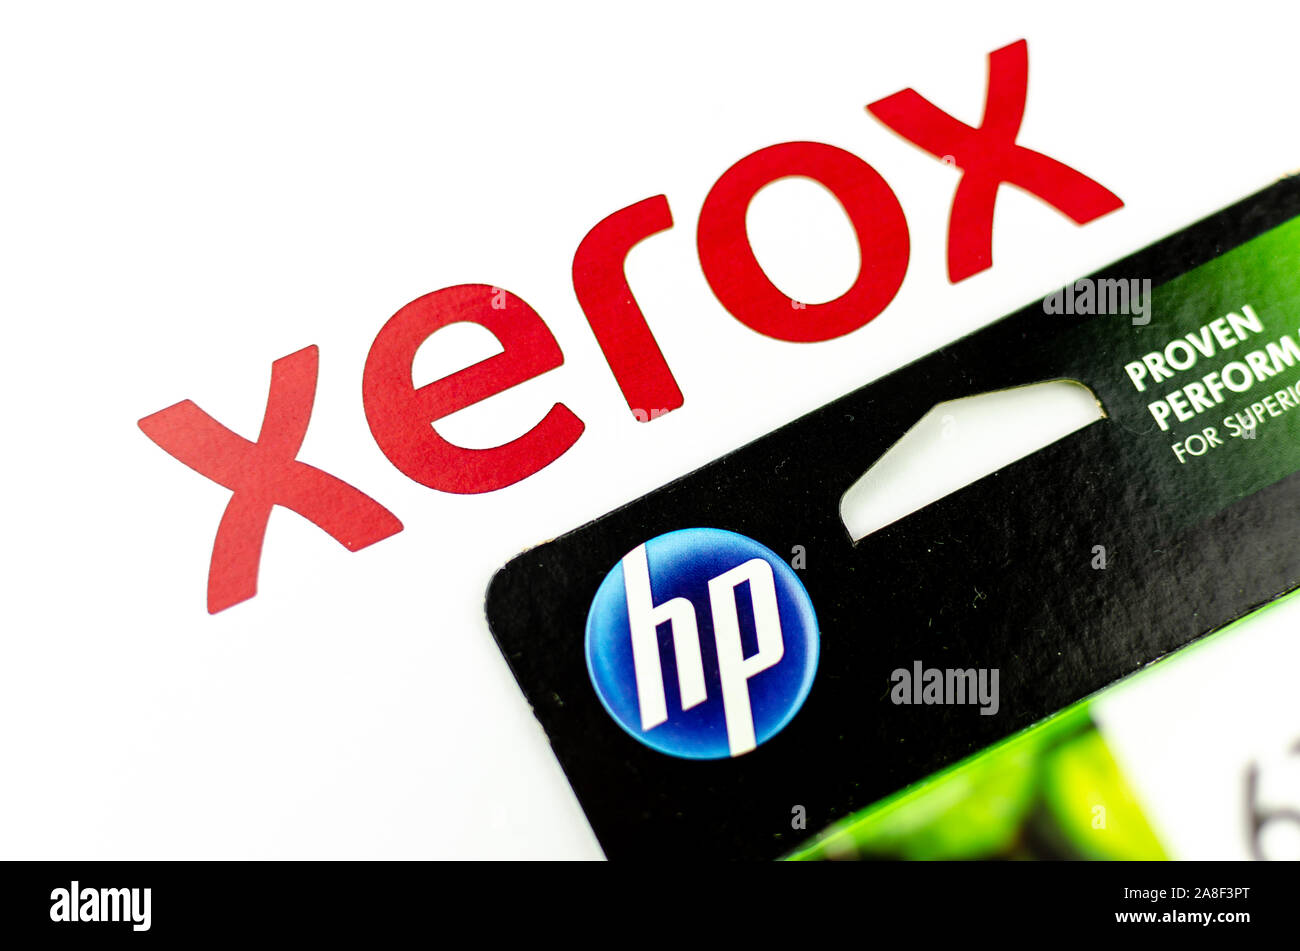 XEROX and HP logos seen on paper and printer cartridge ink. Concept photo - XEROX is a paper, HP is an ink. Selective focus. Stock Photo